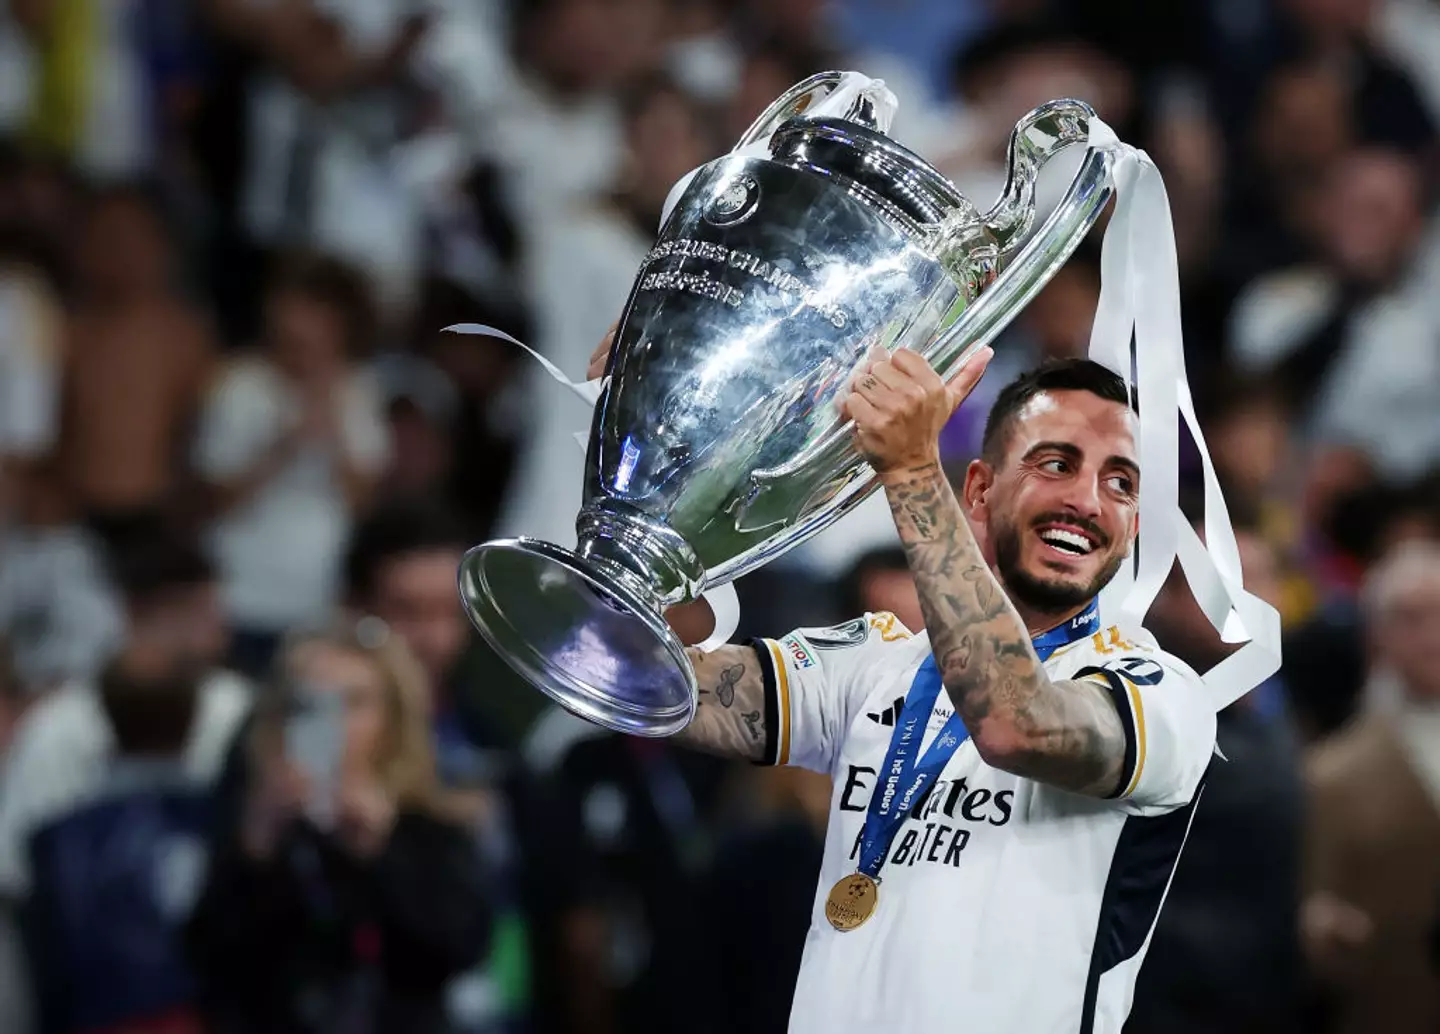 Joselu was a key player in Real Madrid winning a historic 15th Champions League. (Image: Getty)